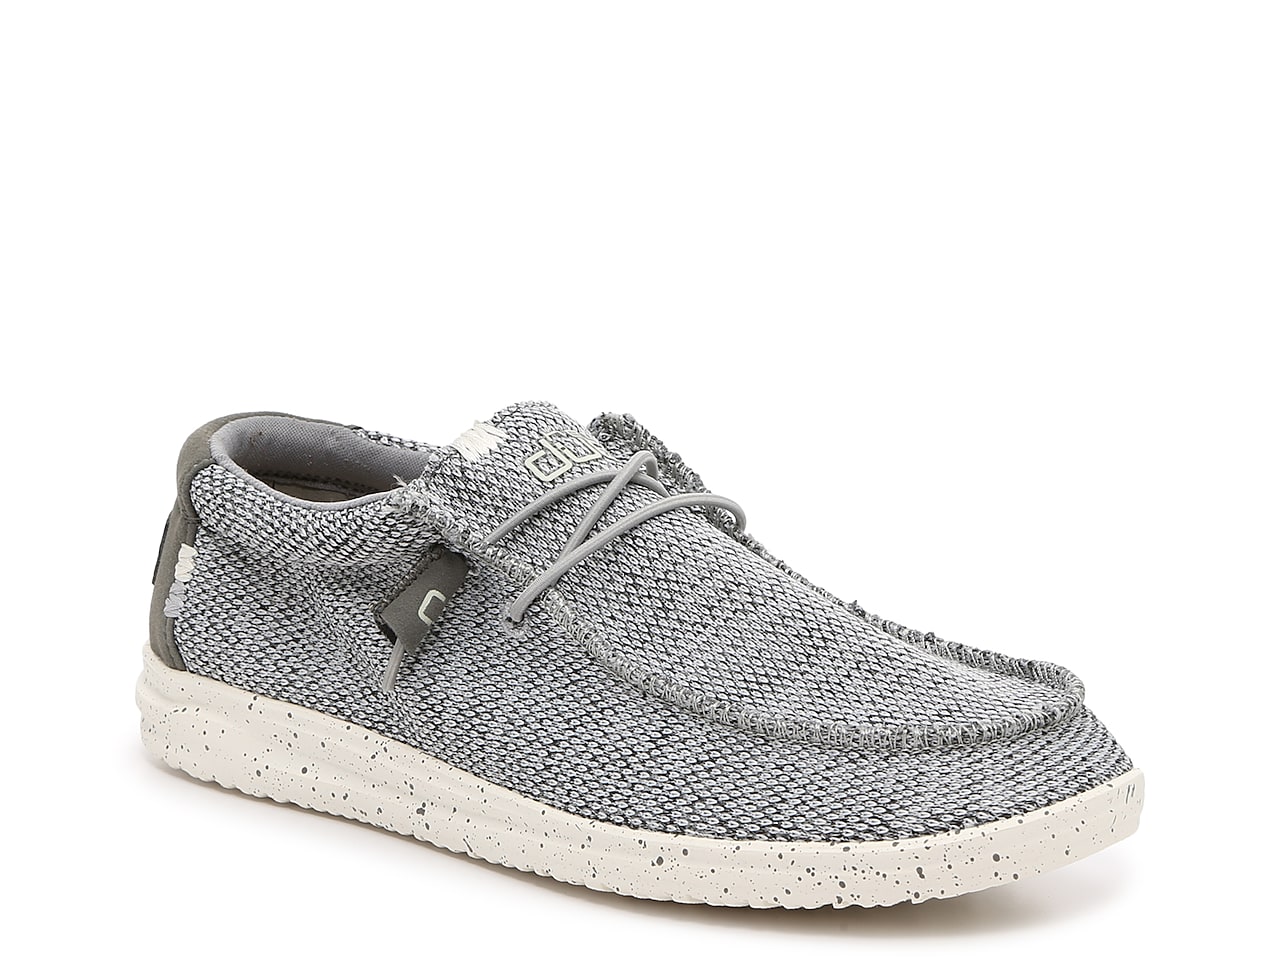 Wally Free Slip-On; father's day gift ideas